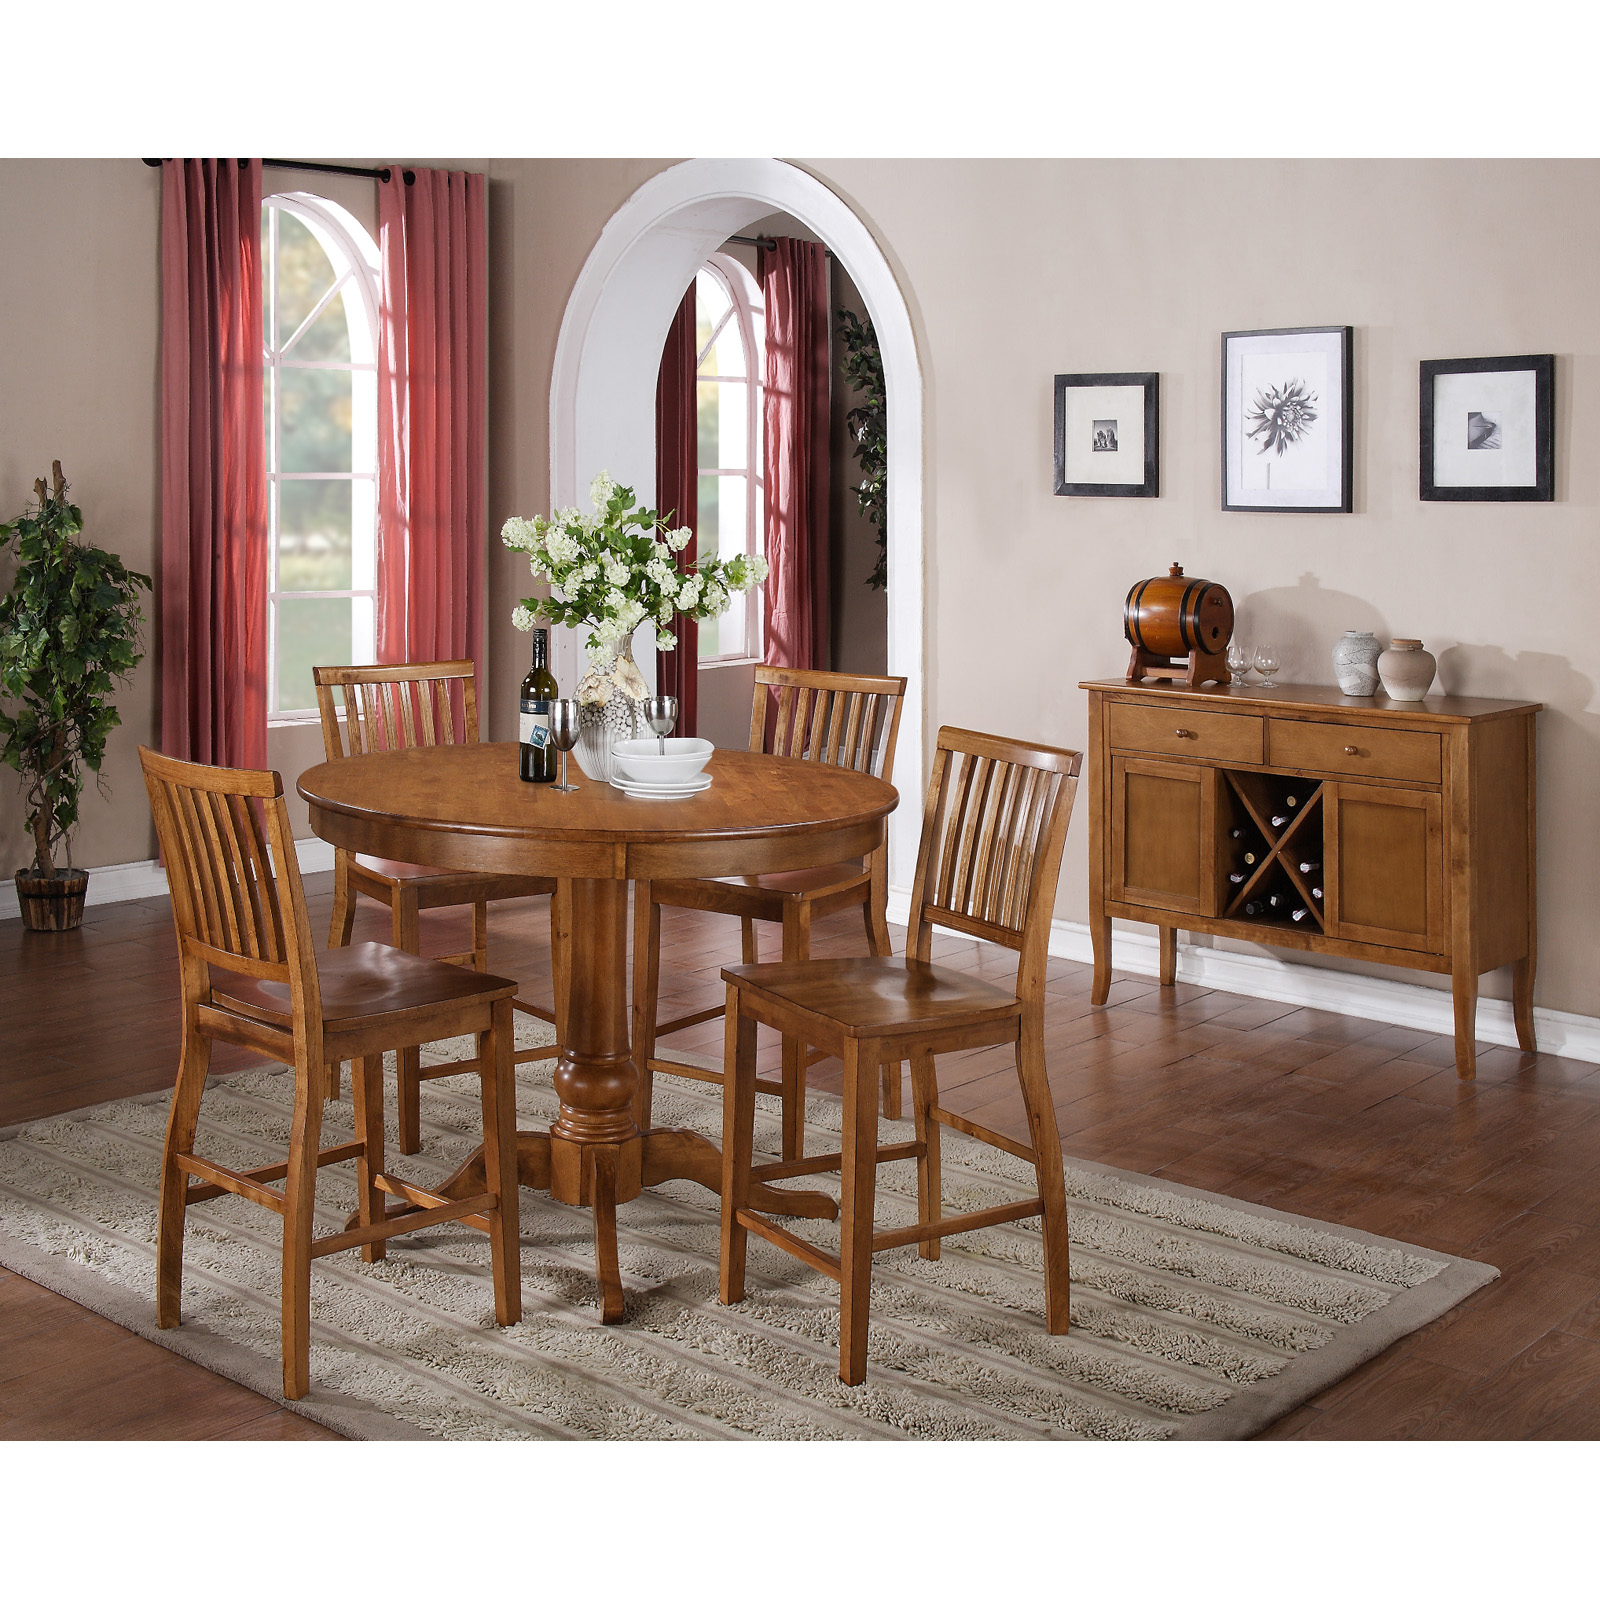 Counter height round dining table 1